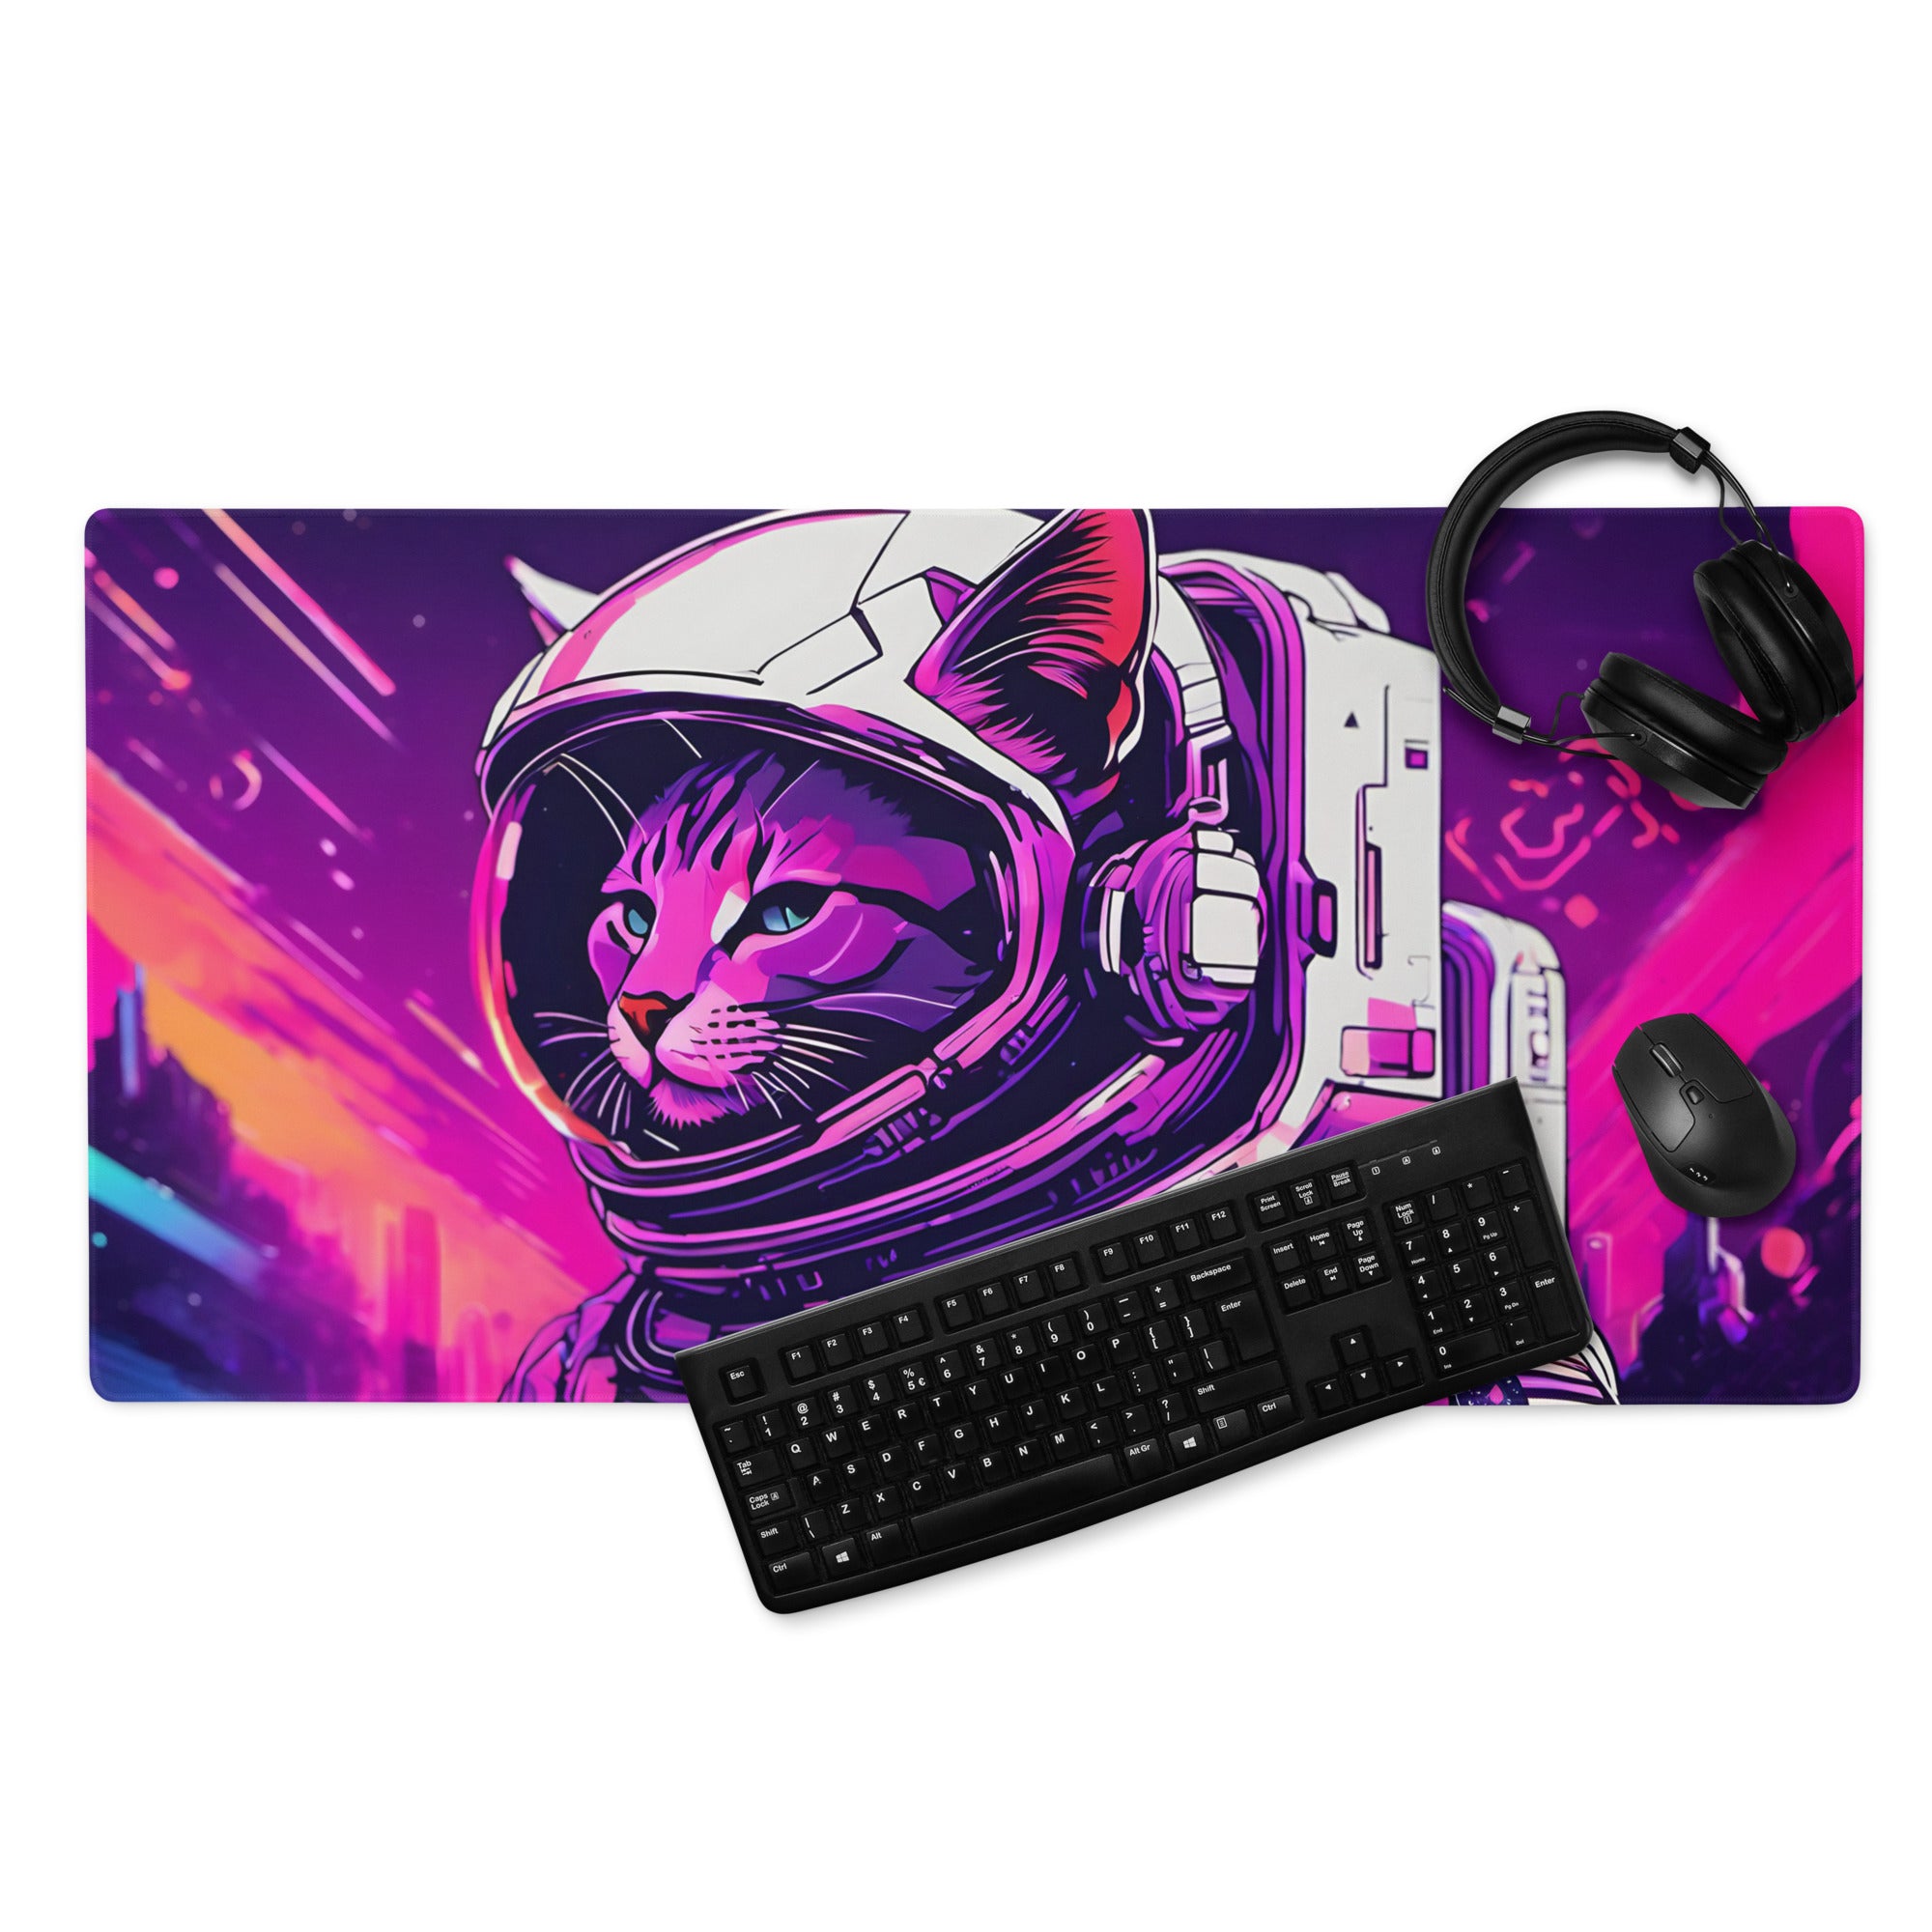 Deskmat | Space Cat Desk Mat SC-5 | Gaming Pad For Laptop Computer |  High Quality Mouse Pad For Keyboard